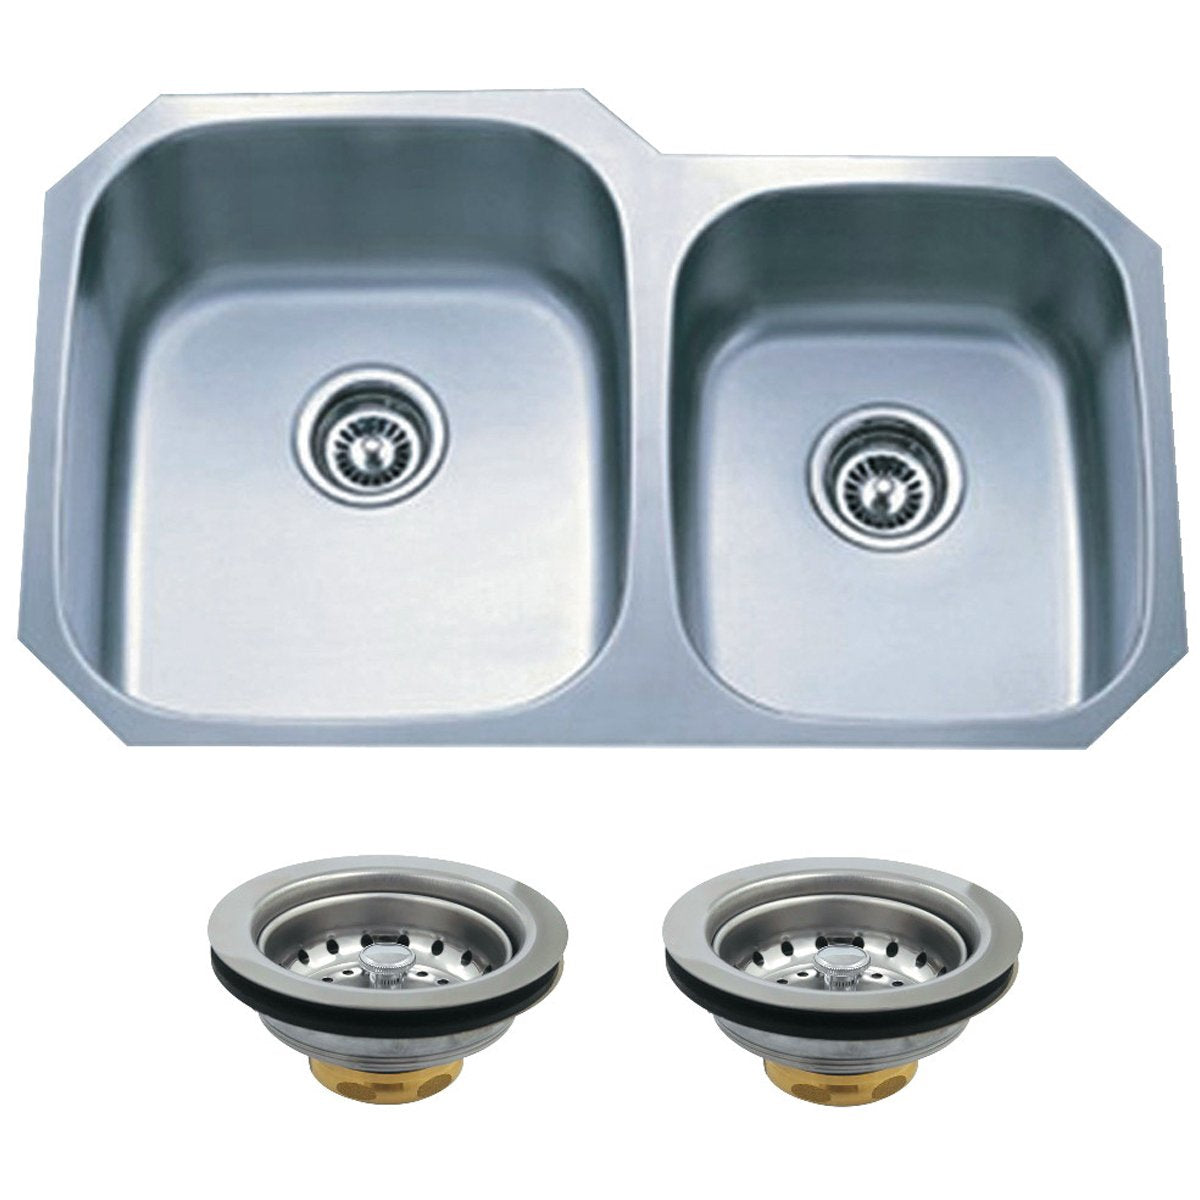 Kingston Brass 32" x 20.75" x 7.5" Undermount Stainless Steel Double Bowl Kitchen Sink Combo with Strainers